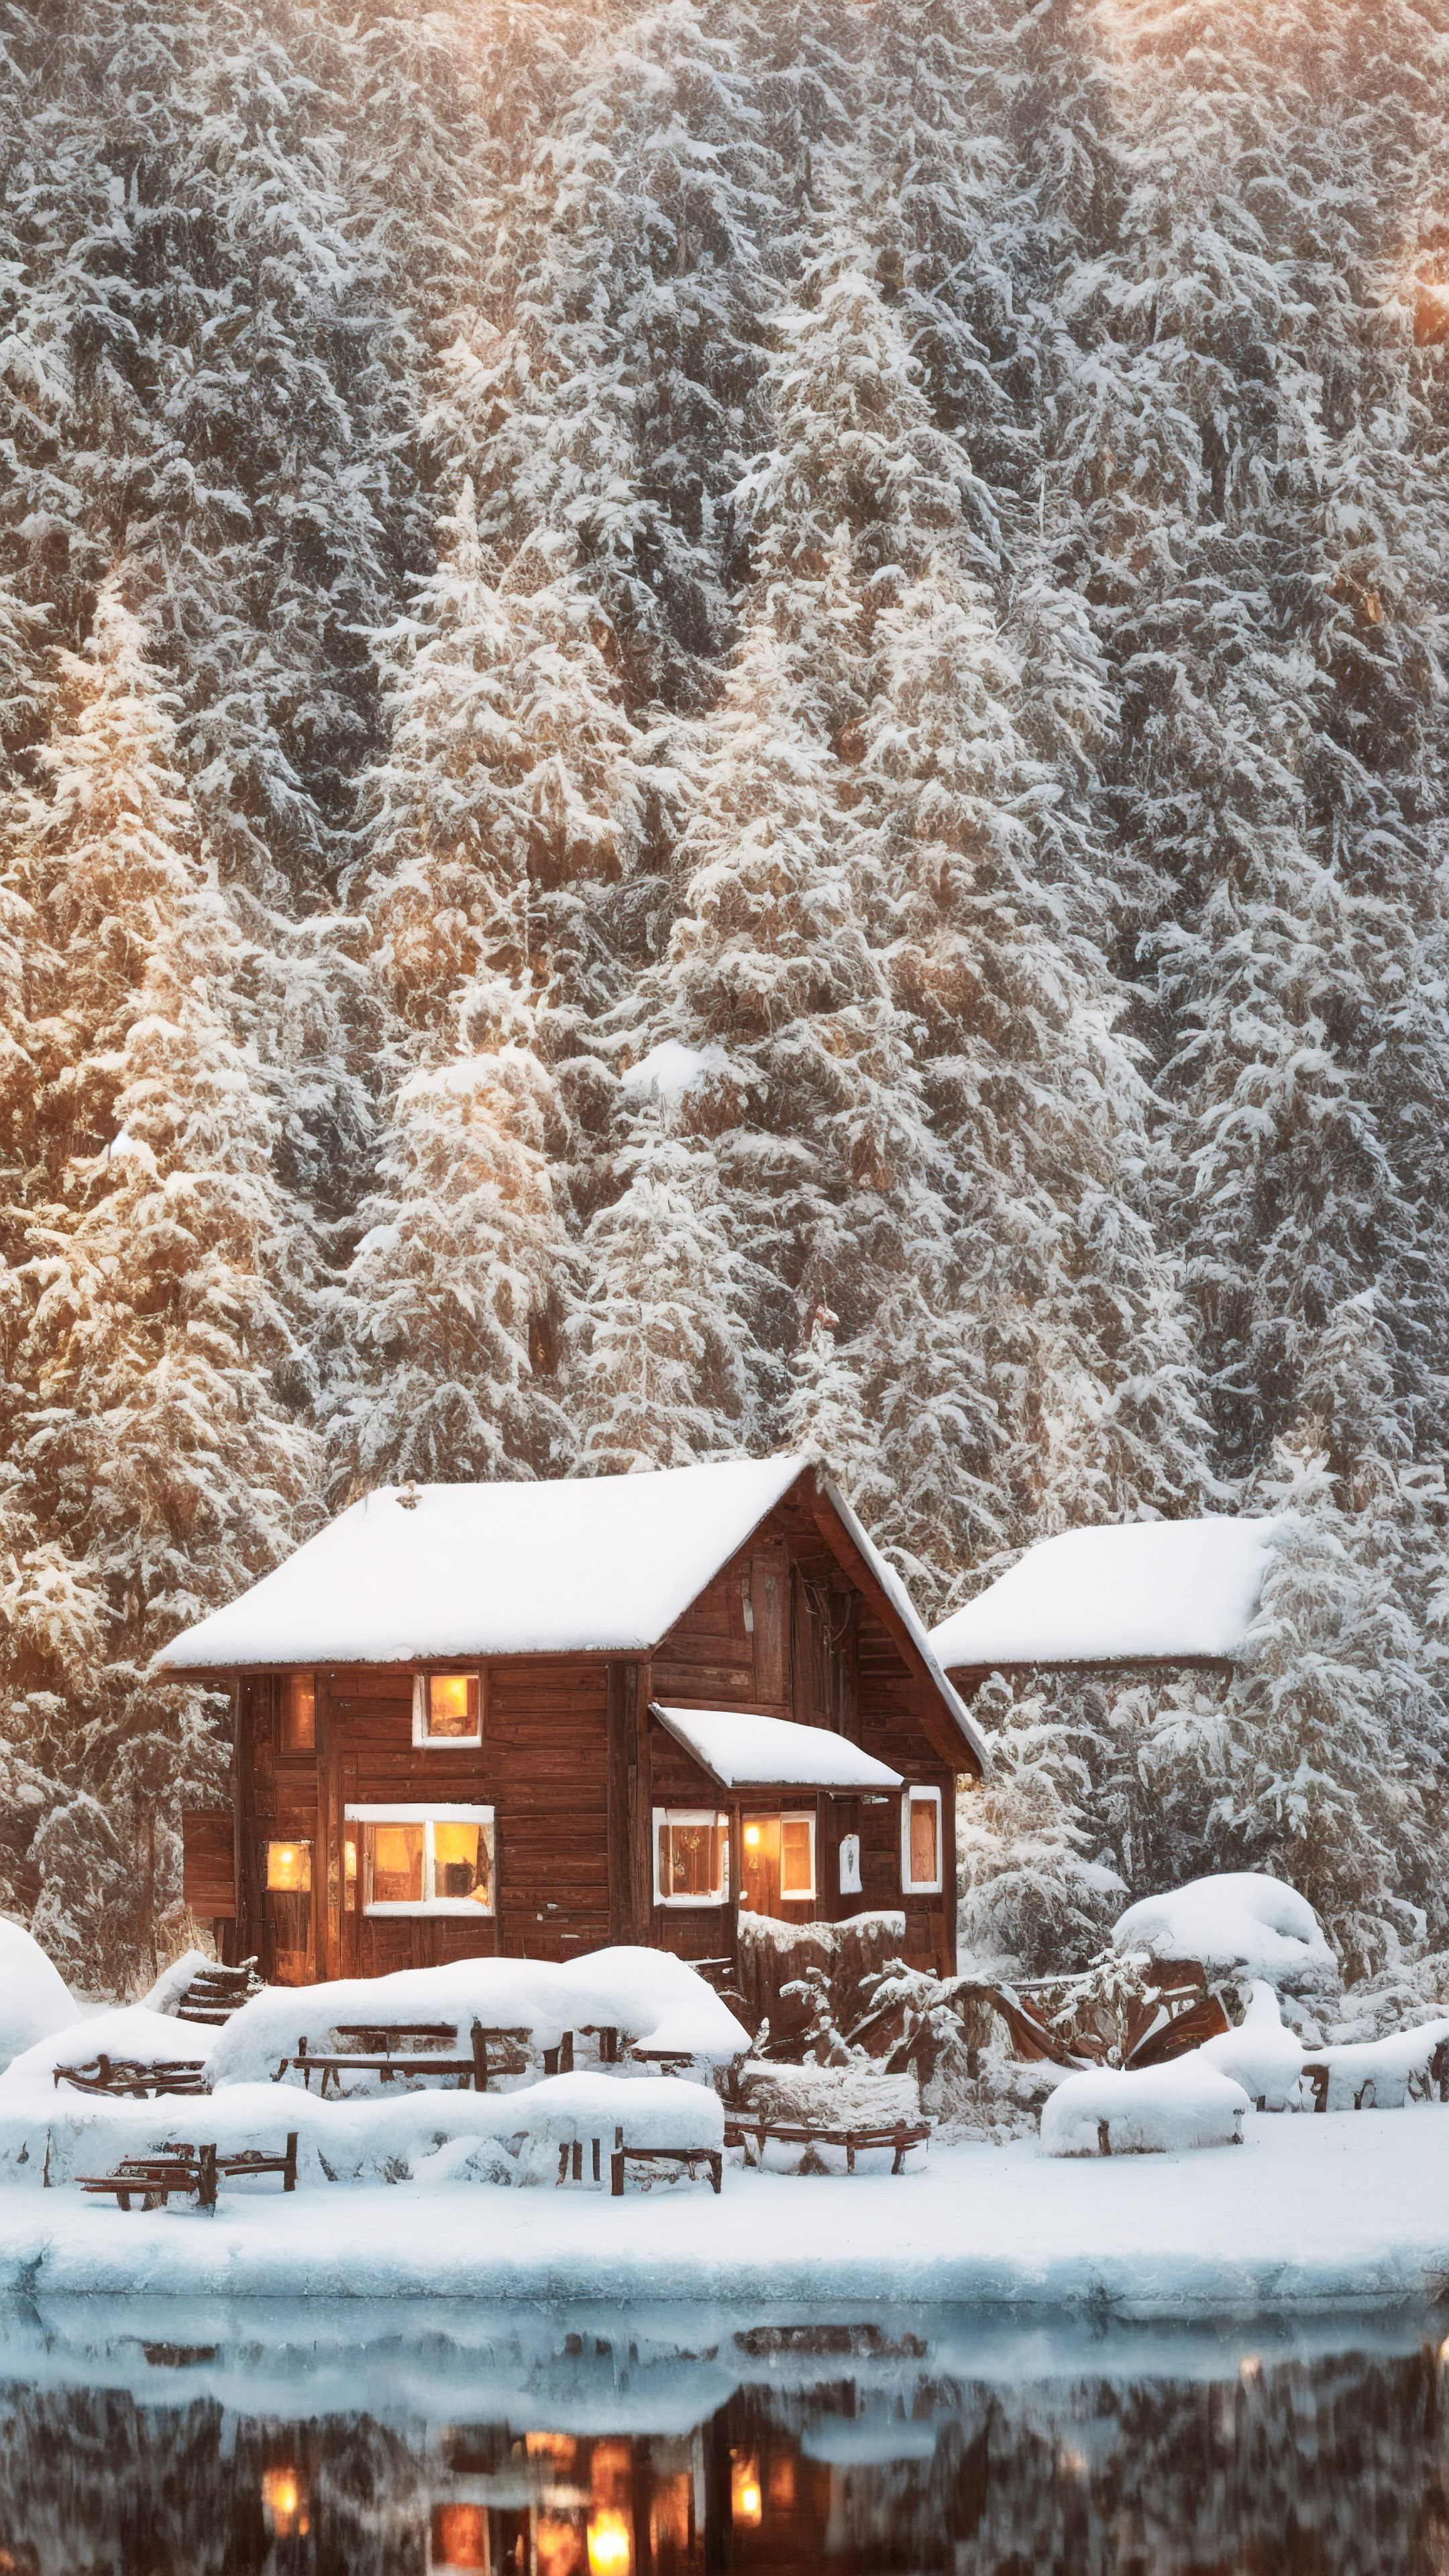 Discover the charm of winter with our landscape iPhone wallpaper, featuring a serene winter wonderland with snow-covered trees and a cozy cabin adorned with holiday lights.